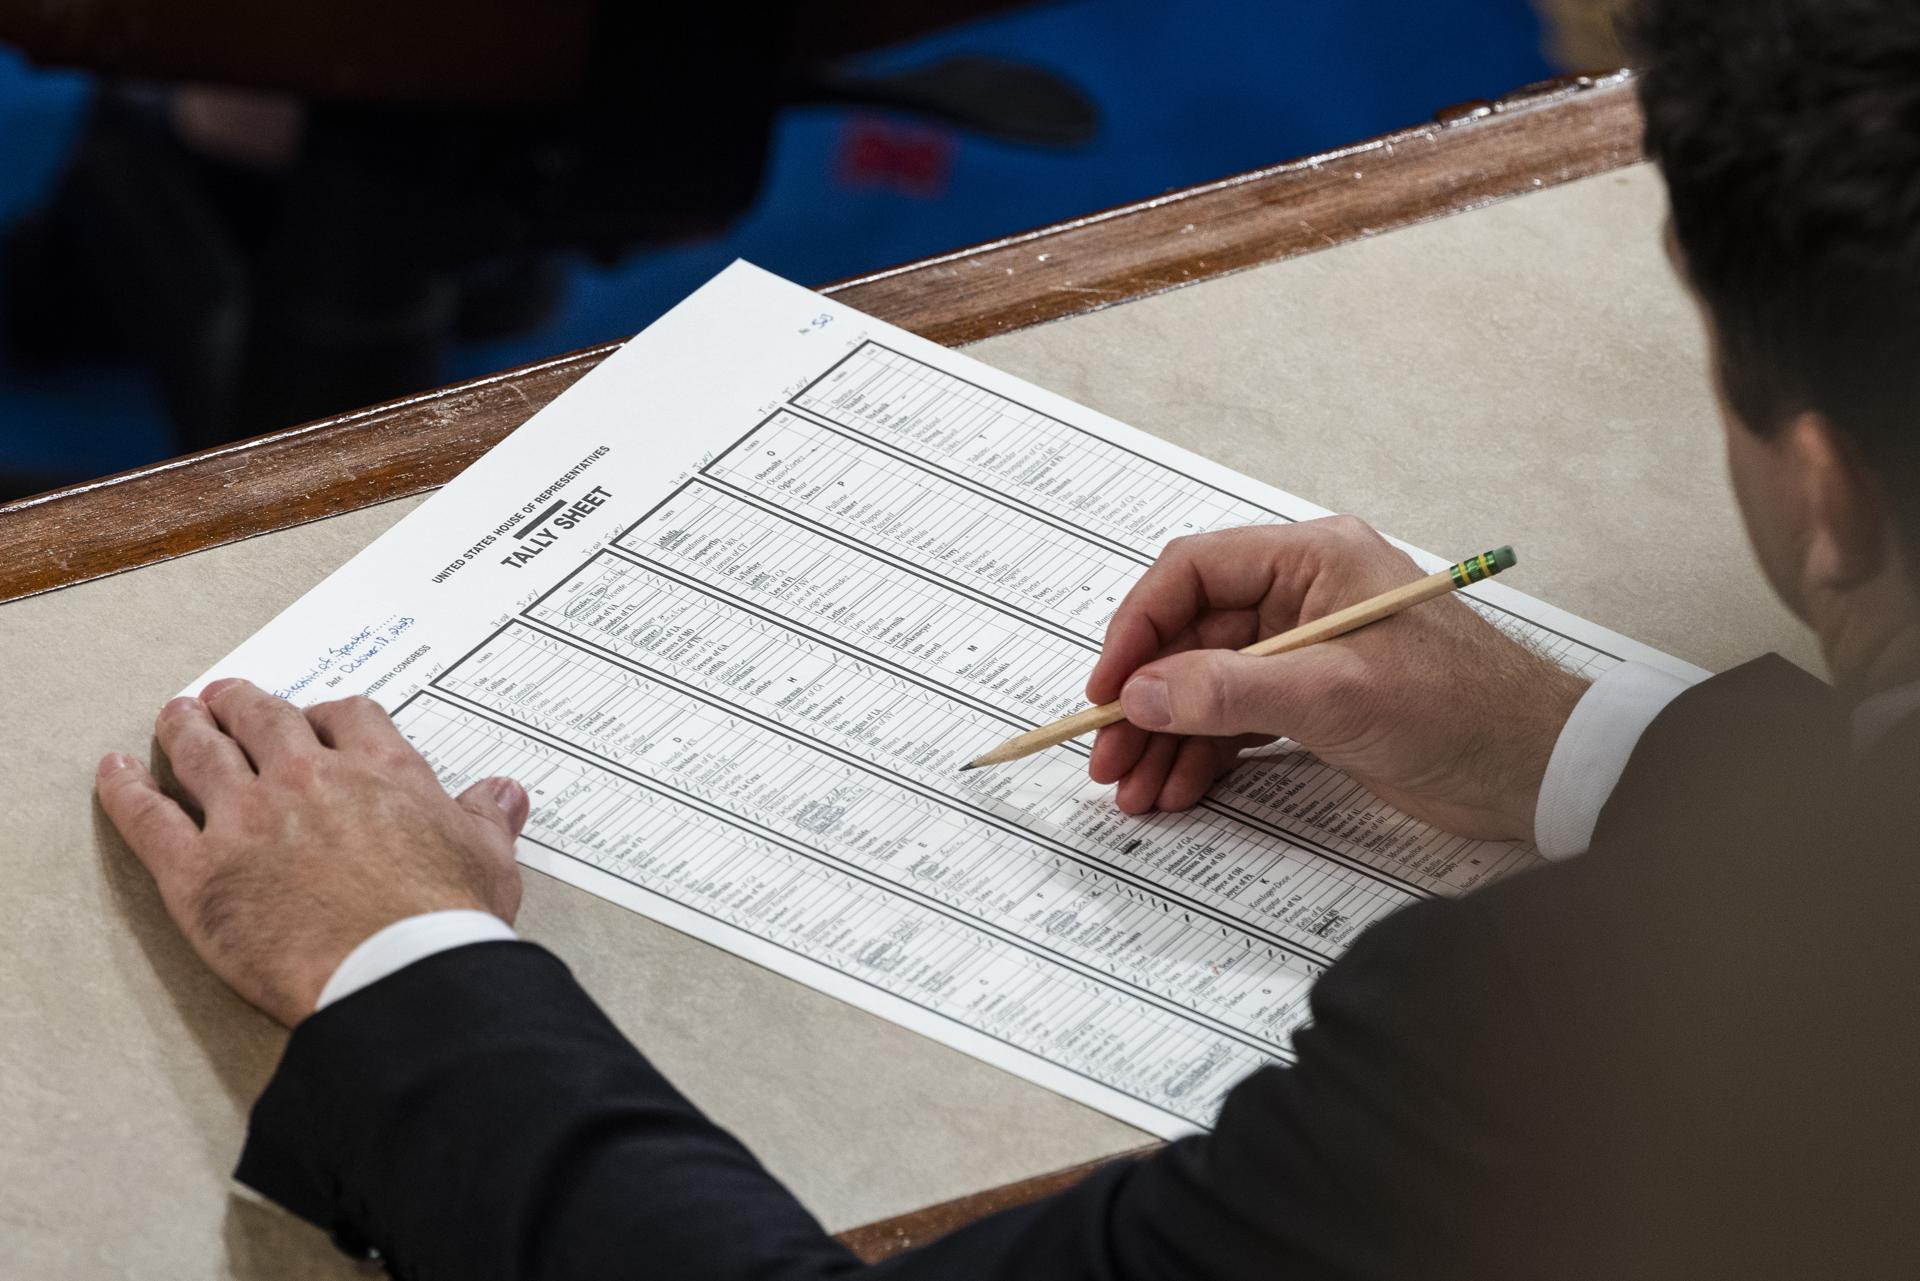 A lawmaker tallies votes during Republican Representative from Ohio Jim Jordan's second failed bid to be the next Speaker of the House in the US Capitol in Washington, DC, USA, 18 October 2023. (Jordania) EFE/EPA/JIM LO SCALZO